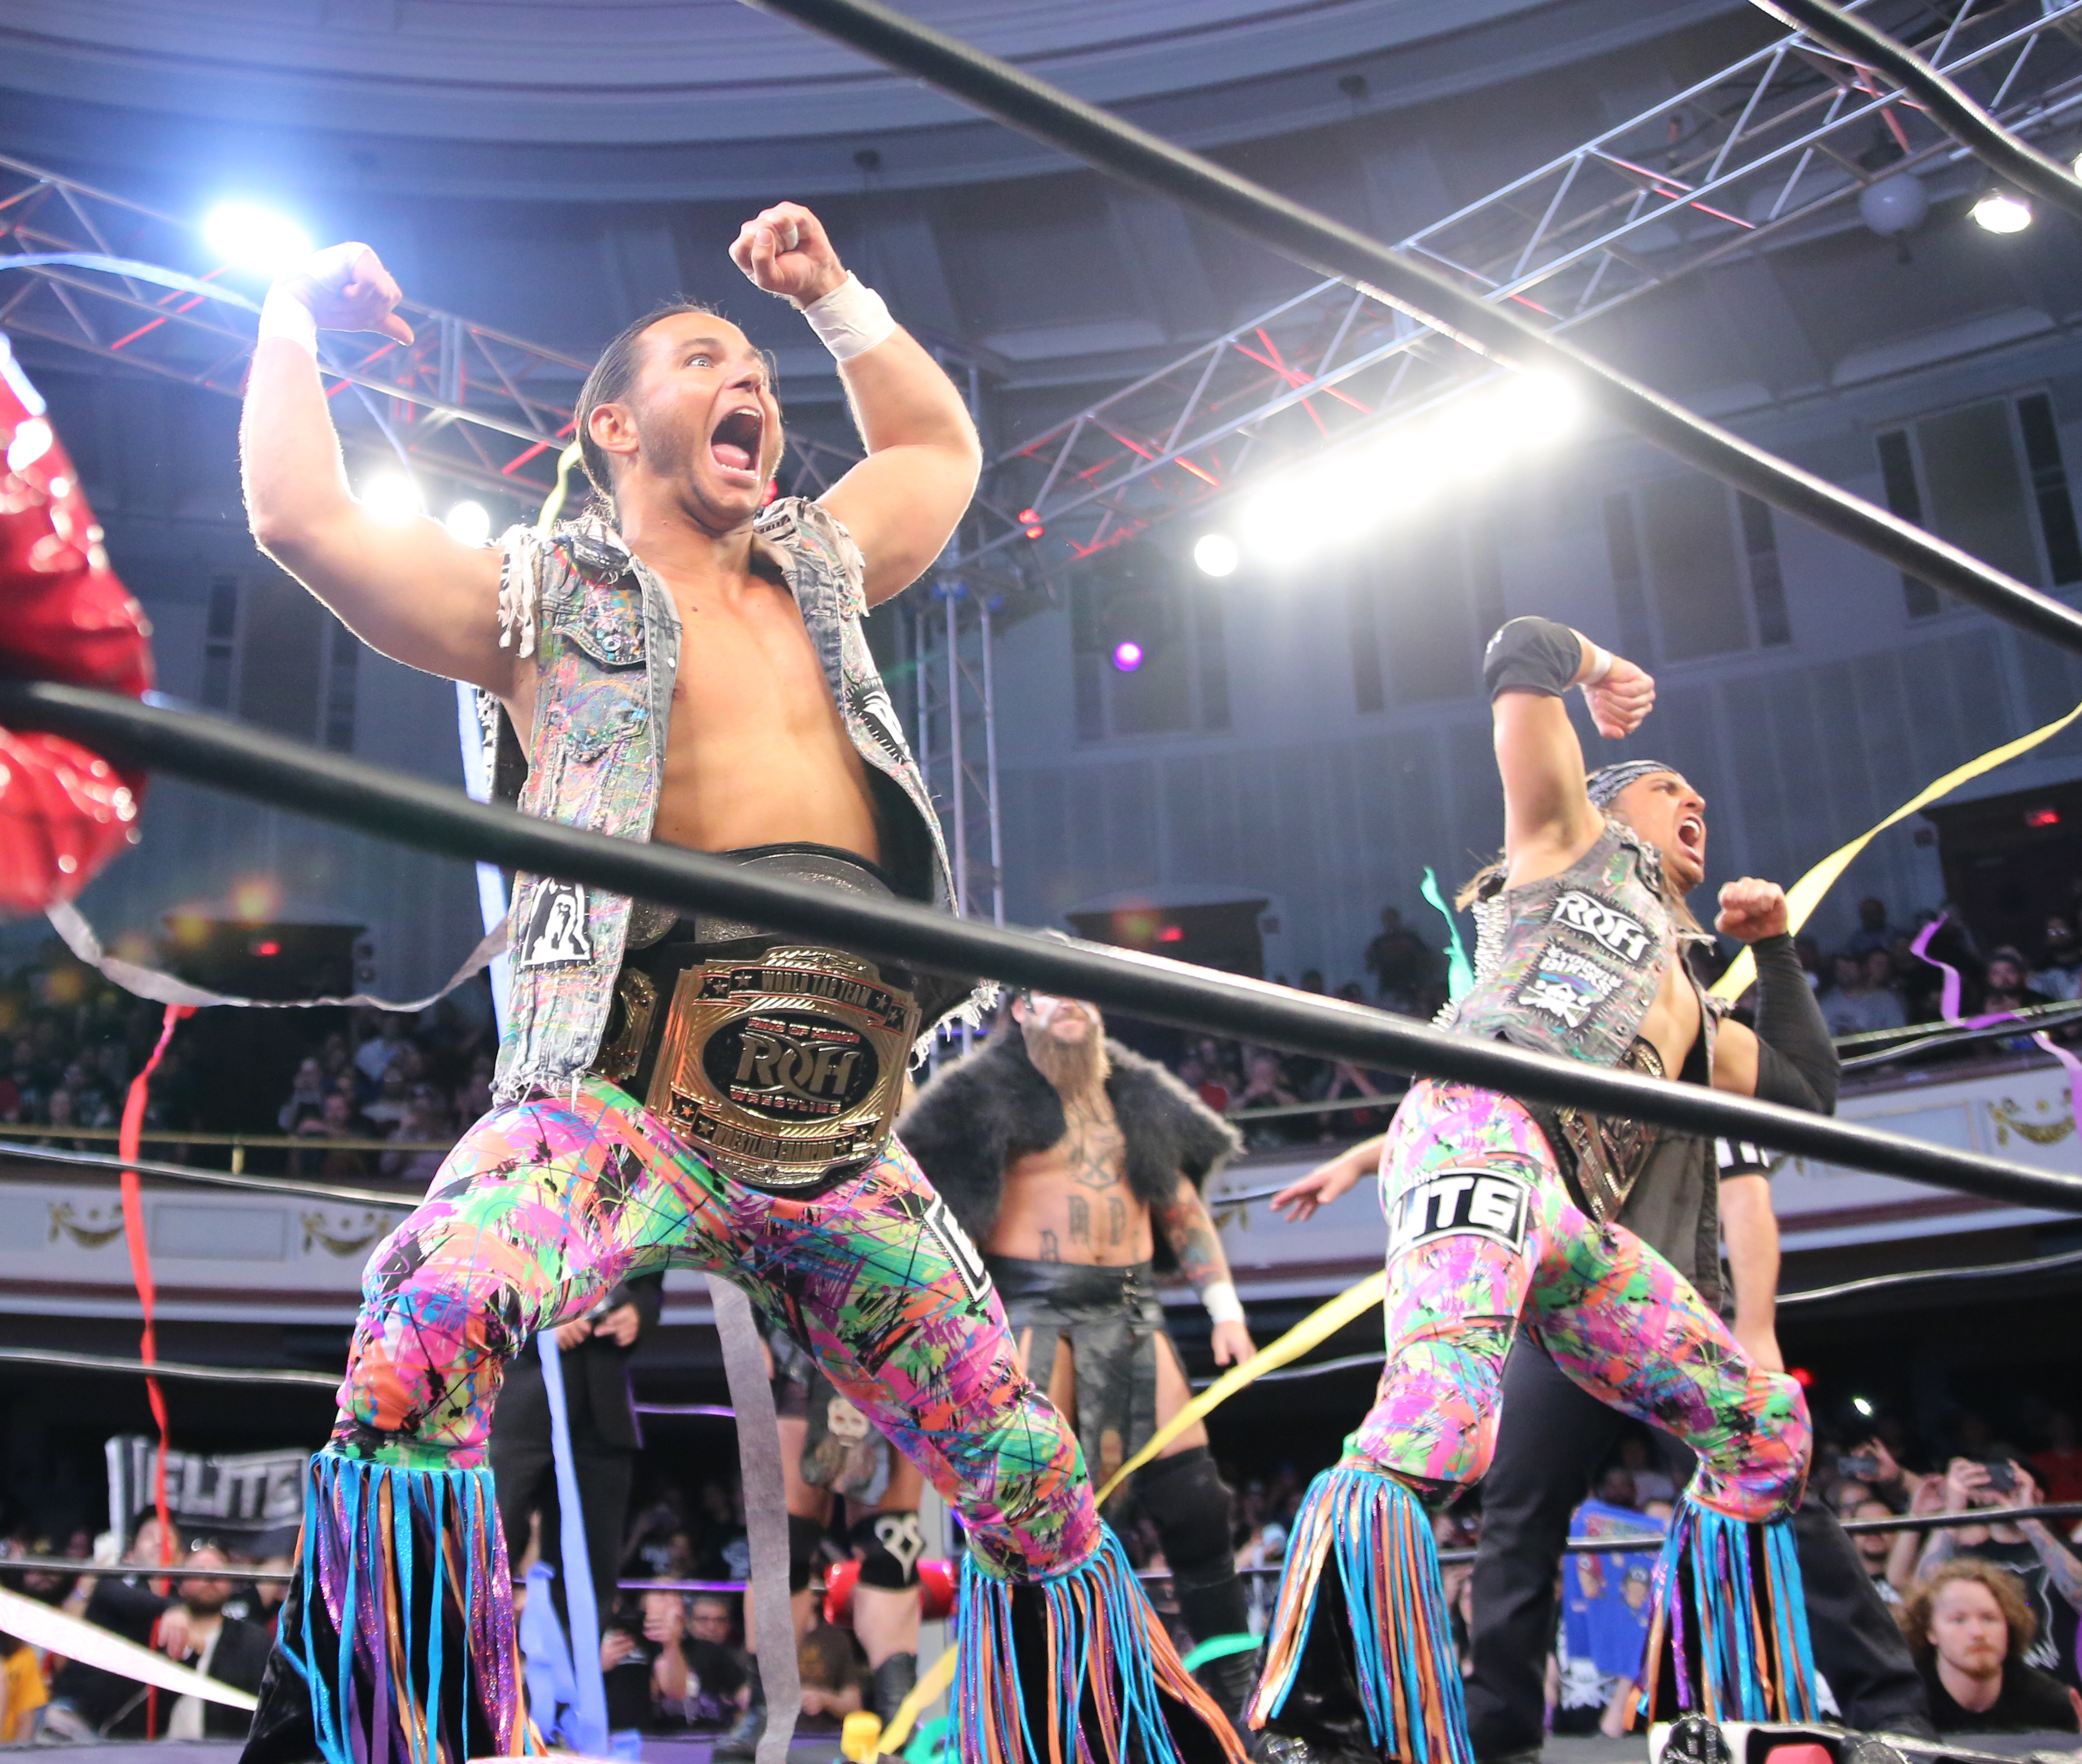 Young Bucks Share Footage Of Themselves Wrestling As Younger Bucks, Jericho Takes The Bullet Train